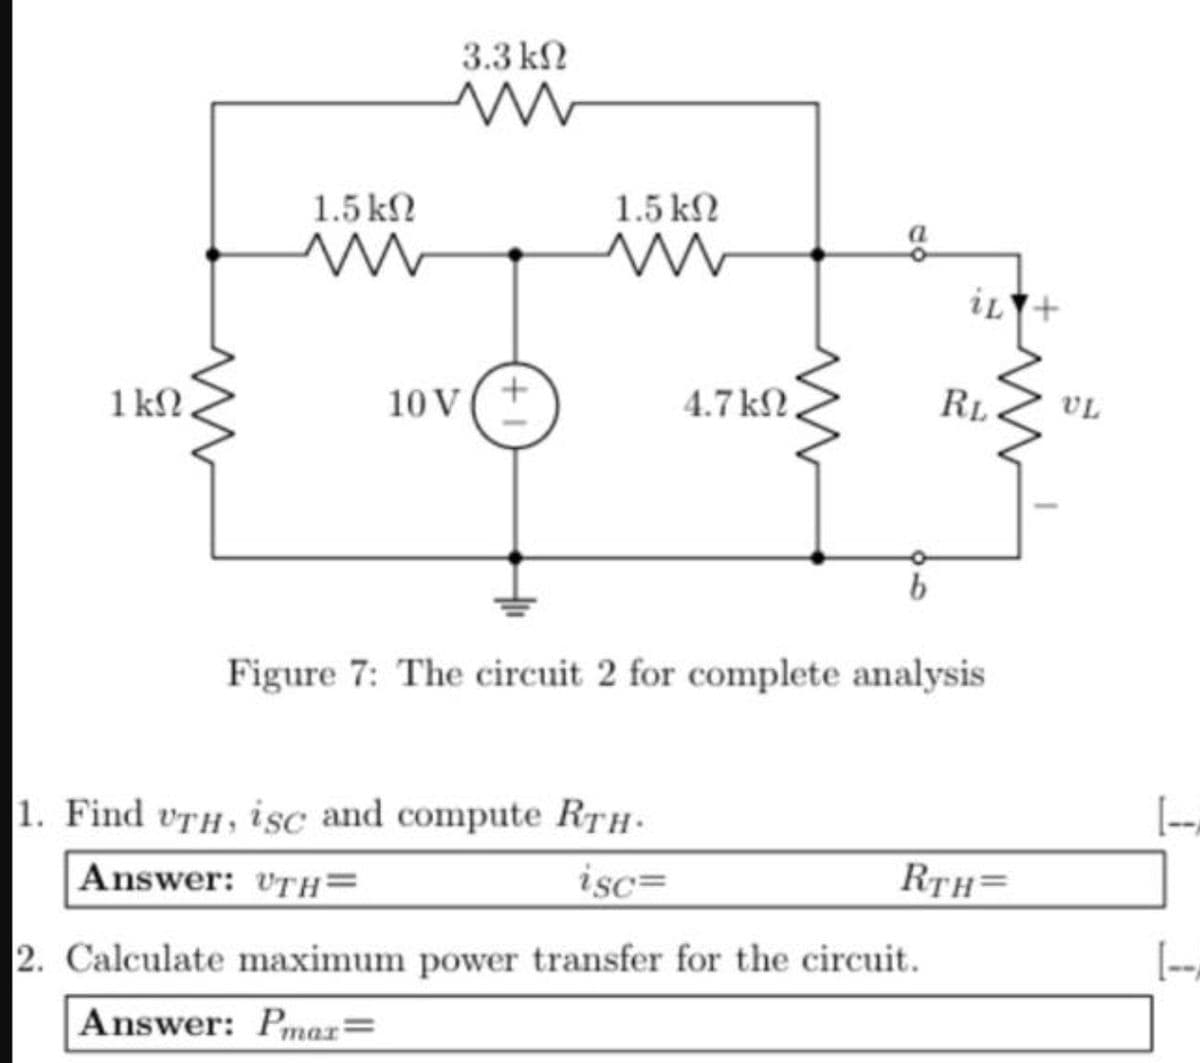 1 kn.
1.5 ΚΩ
ww
3.3 ΚΩ
ww
10 V
+1
1.5 ΚΩ
4.7 ΚΩ,
iL
1. Find UTH, isc and compute RTH-
Answer: UTH=
isc=
2. Calculate maximum power transfer for the circuit.
Answer: Pmax=
RL
Figure 7: The circuit 2 for complete analysis
RTH=
UL